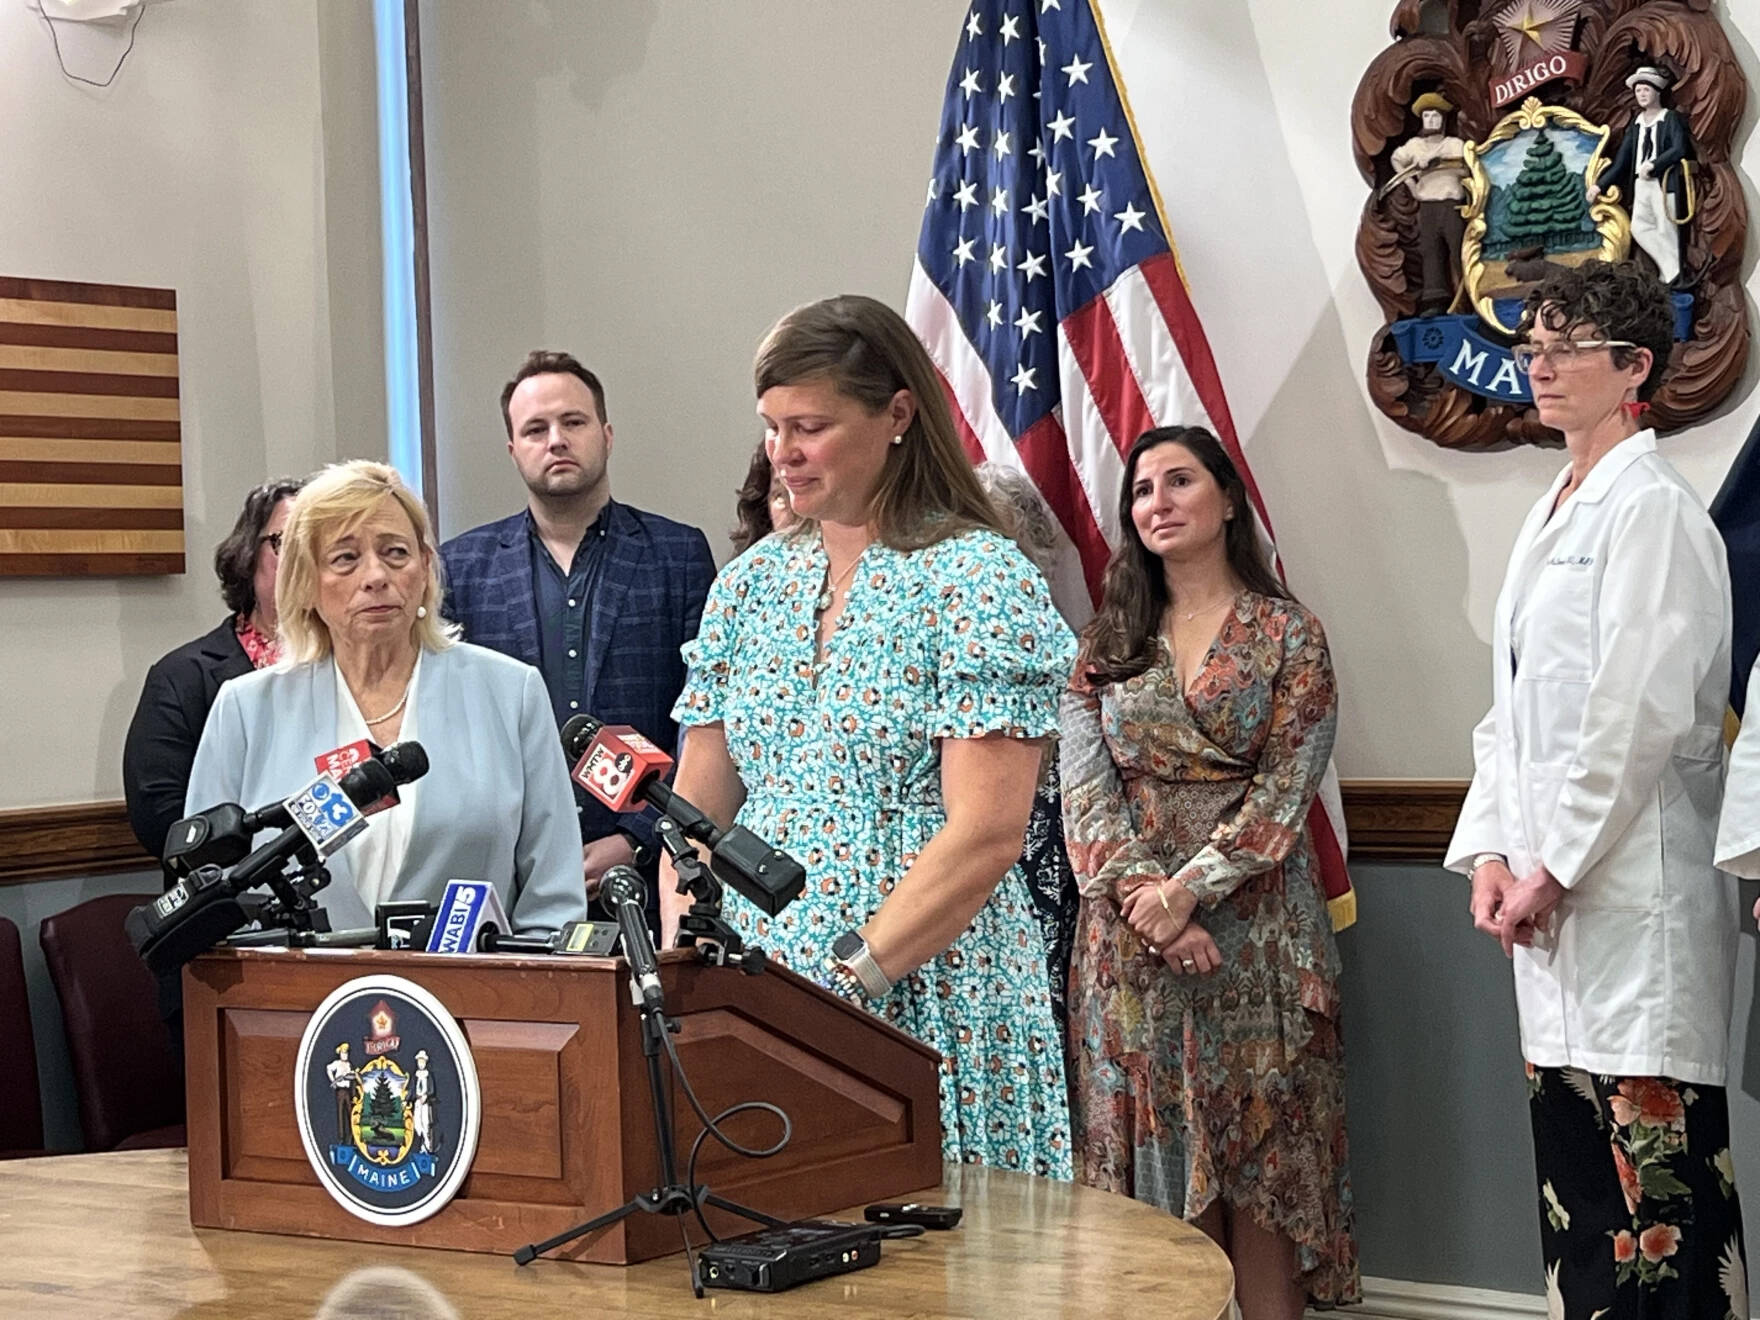 Gov. Janet Mills watches July 19, 2023 as Dana Peirce of Yarmouth talks about having to travel out of state to obtain an abortion late in her pregnancy after the fetus was diagnosed with a fatal condition. (Kevin Miller/Maine Public)